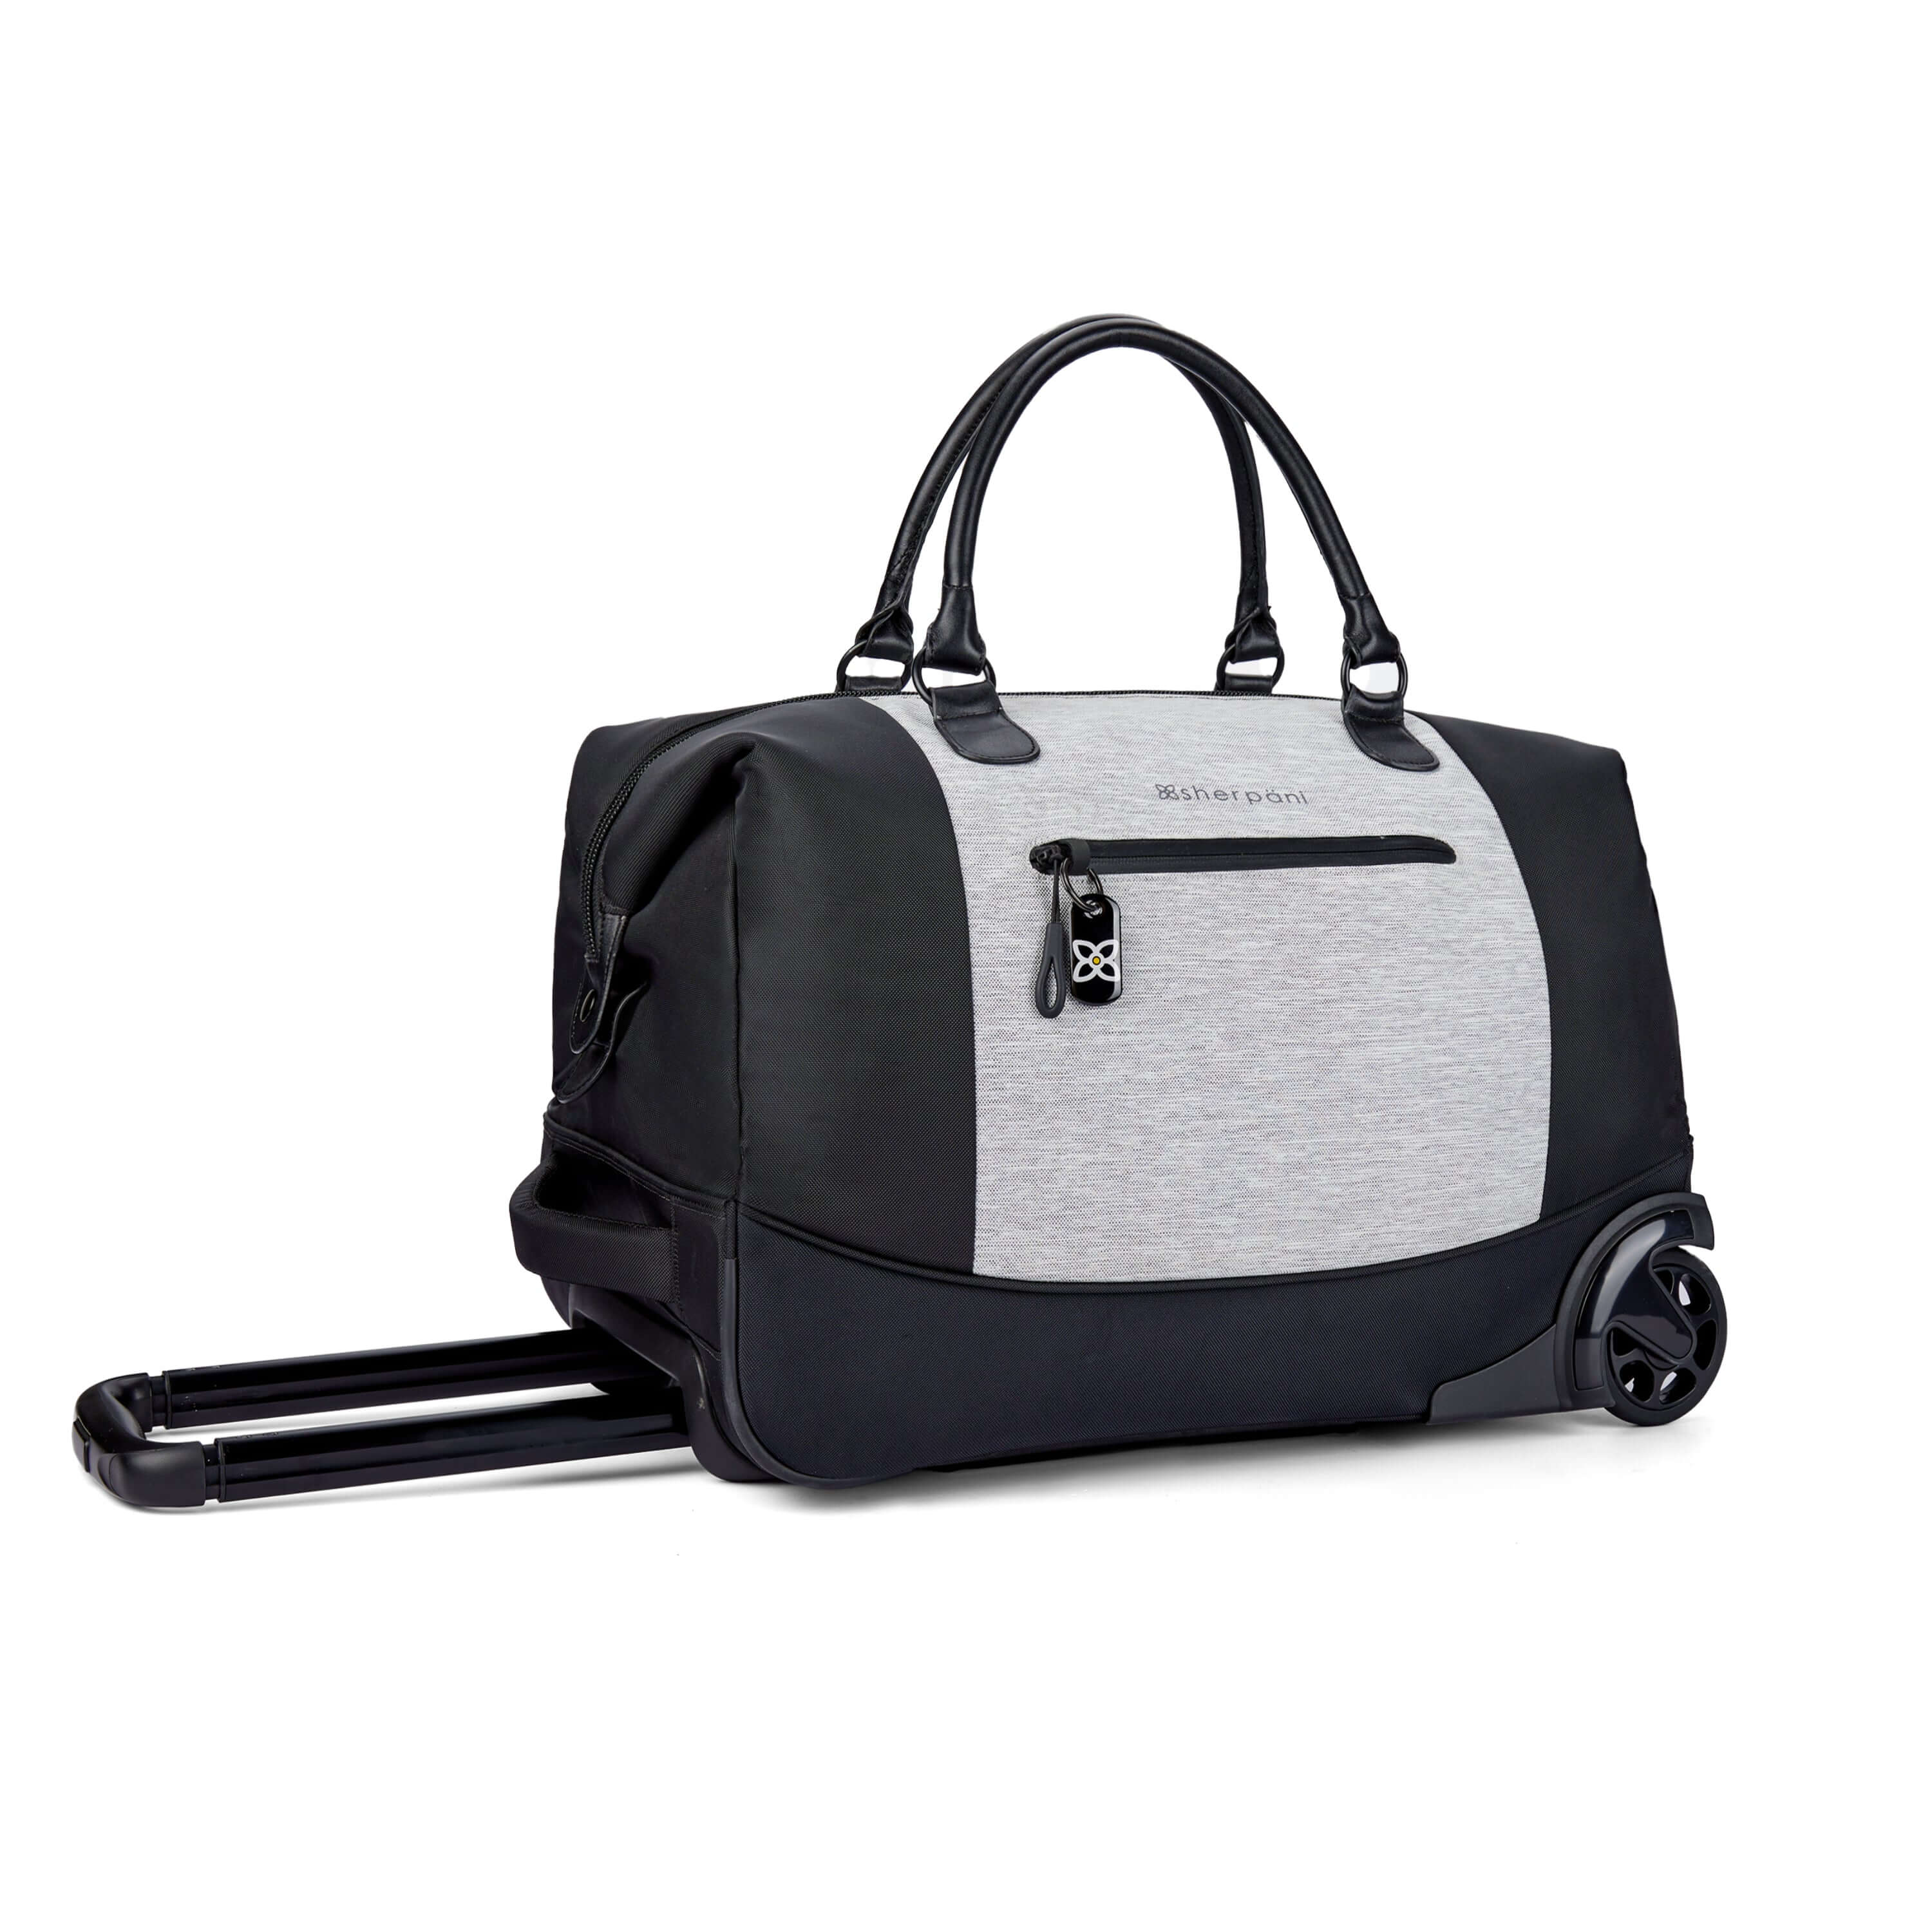 Angled front view of Sherpani’s Anti Theft rolling Duffle, the Trip in Sterling, with vegan leather accents in black. The bag lies flat on the ground with the luggage handle extended on the left side and the rolling wheels shown on the right side. The bag features short tote handles at the top and an external zipper compartment on the front panel with locking zipper and ReturnMe tag. #color_sterling